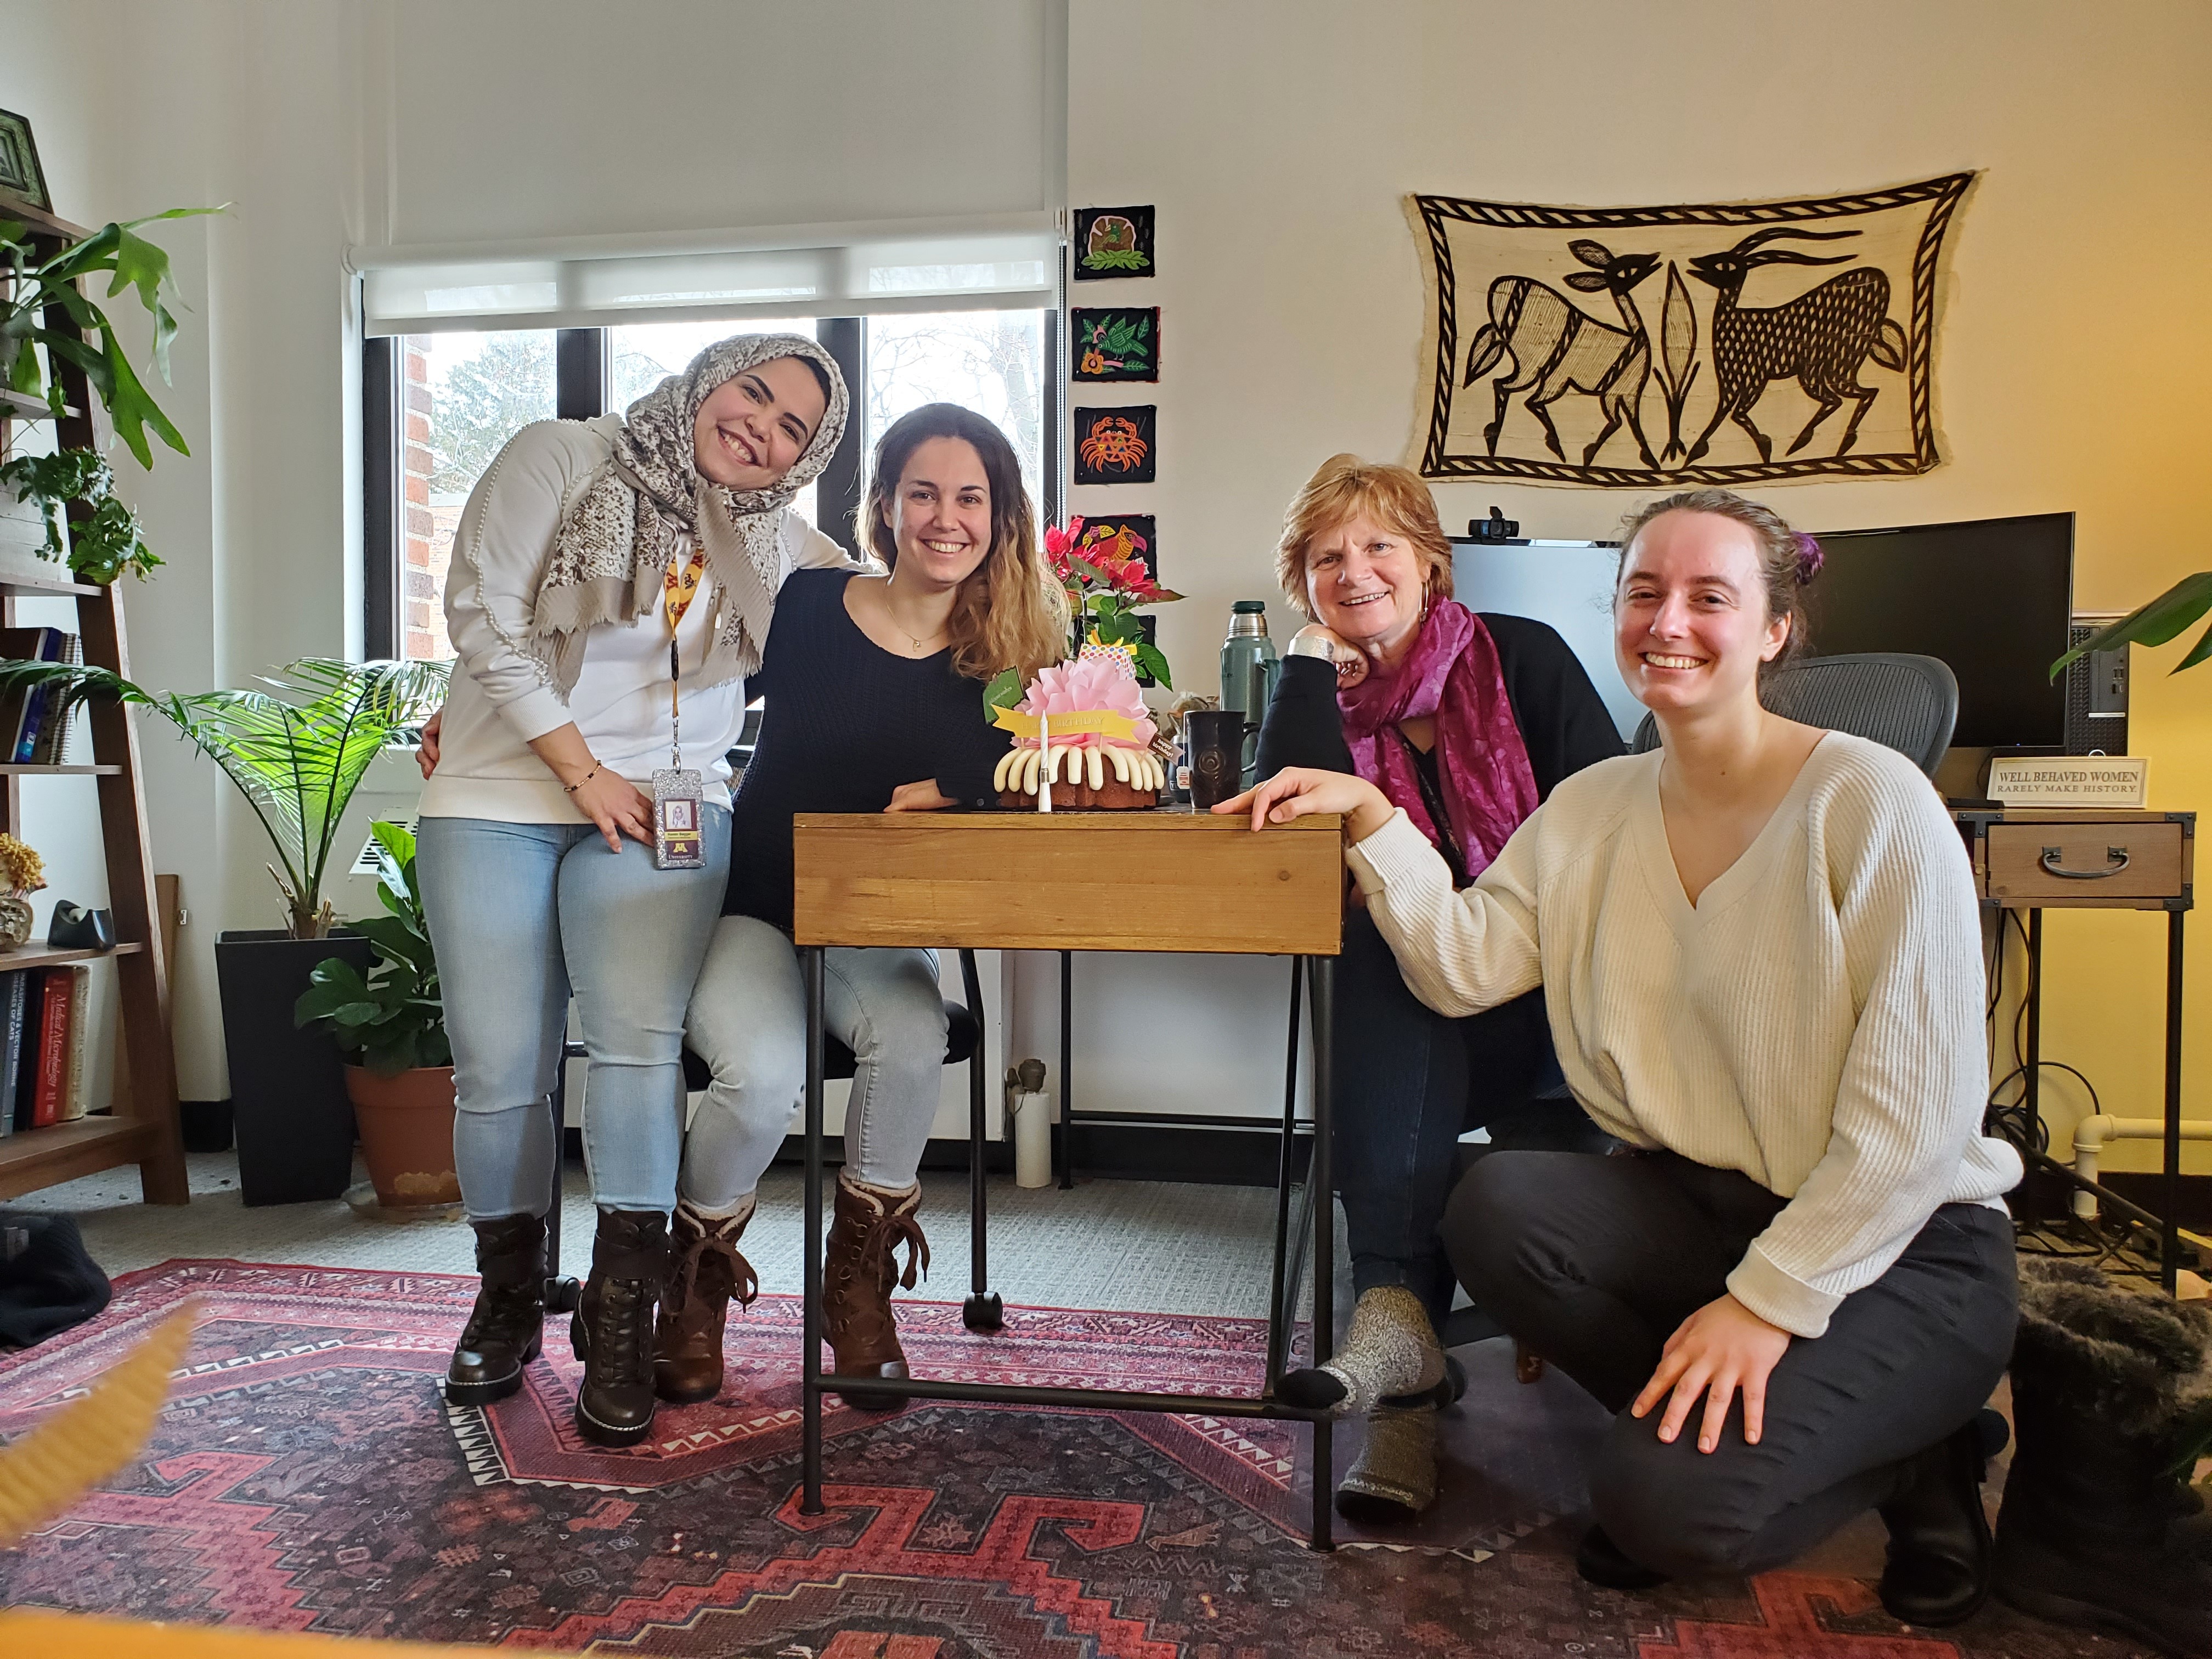 Celebrating Fer's Birthday. From left to right, Hanen Baggar, Fernanda Fumuso, Dr. O'Connor and Mary Piaskowski.